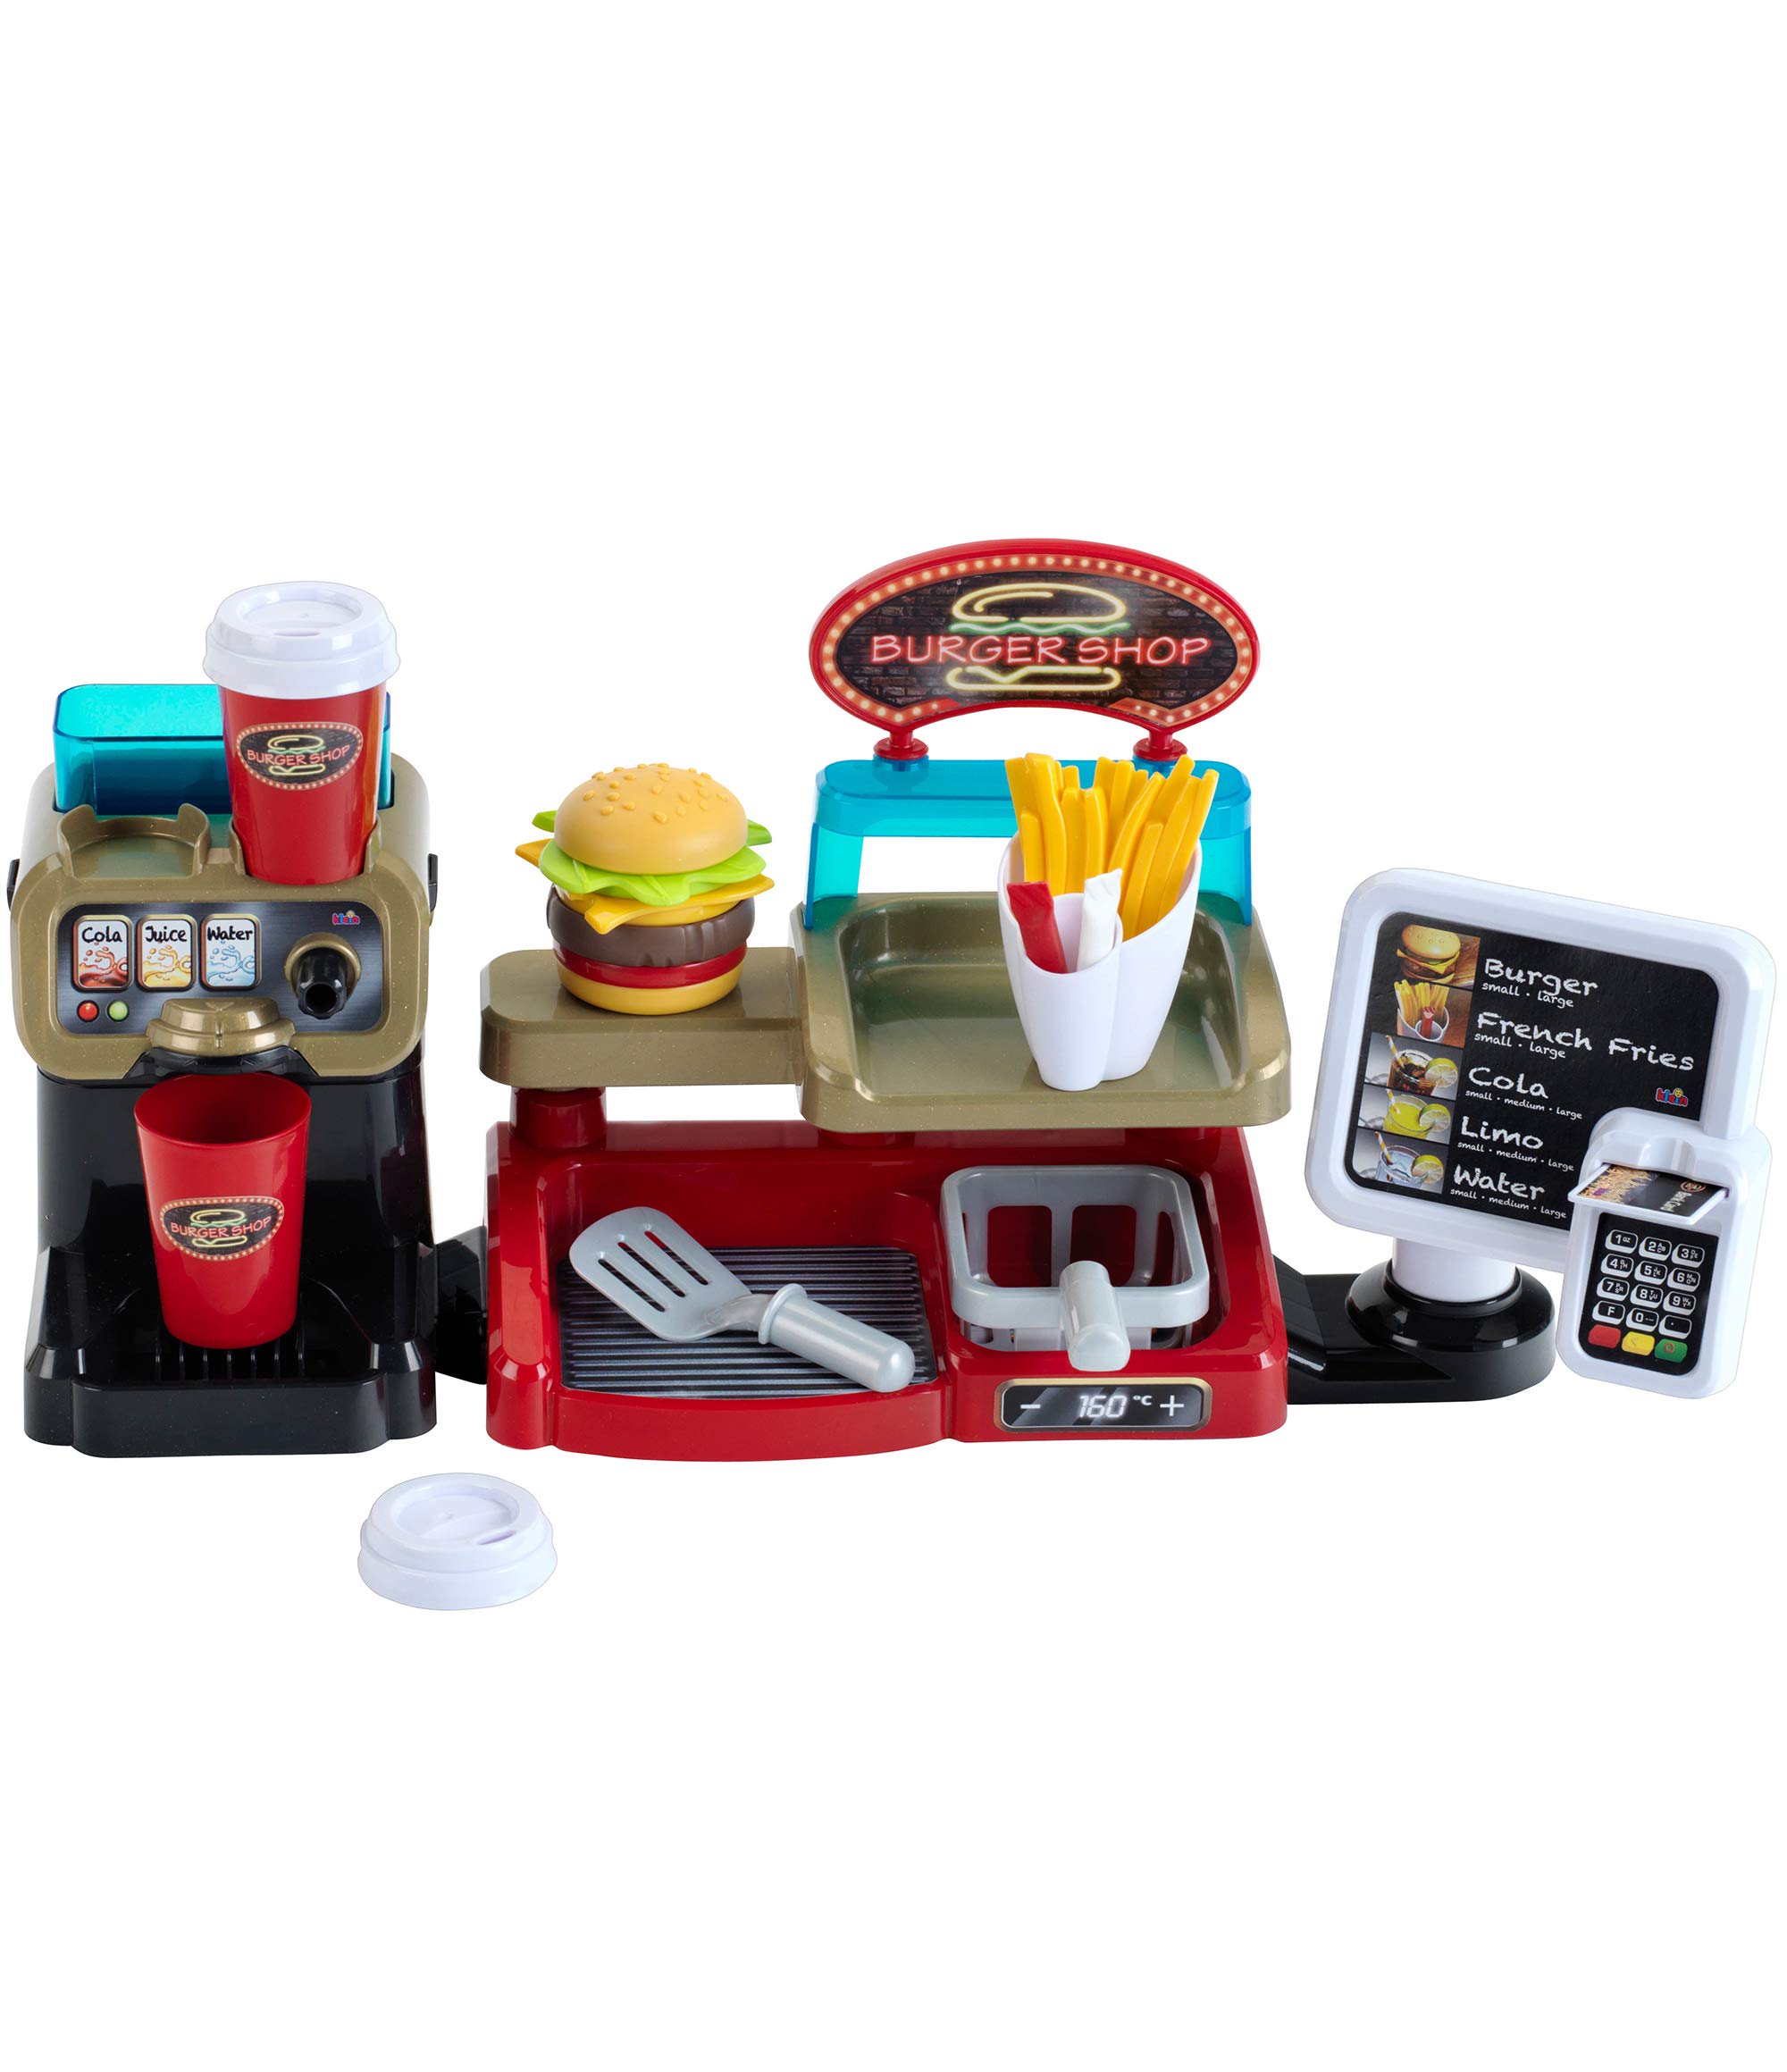 Theo Klein - Burger Shop Premium Toys for Kids Ages 3 Years & Up, 7311